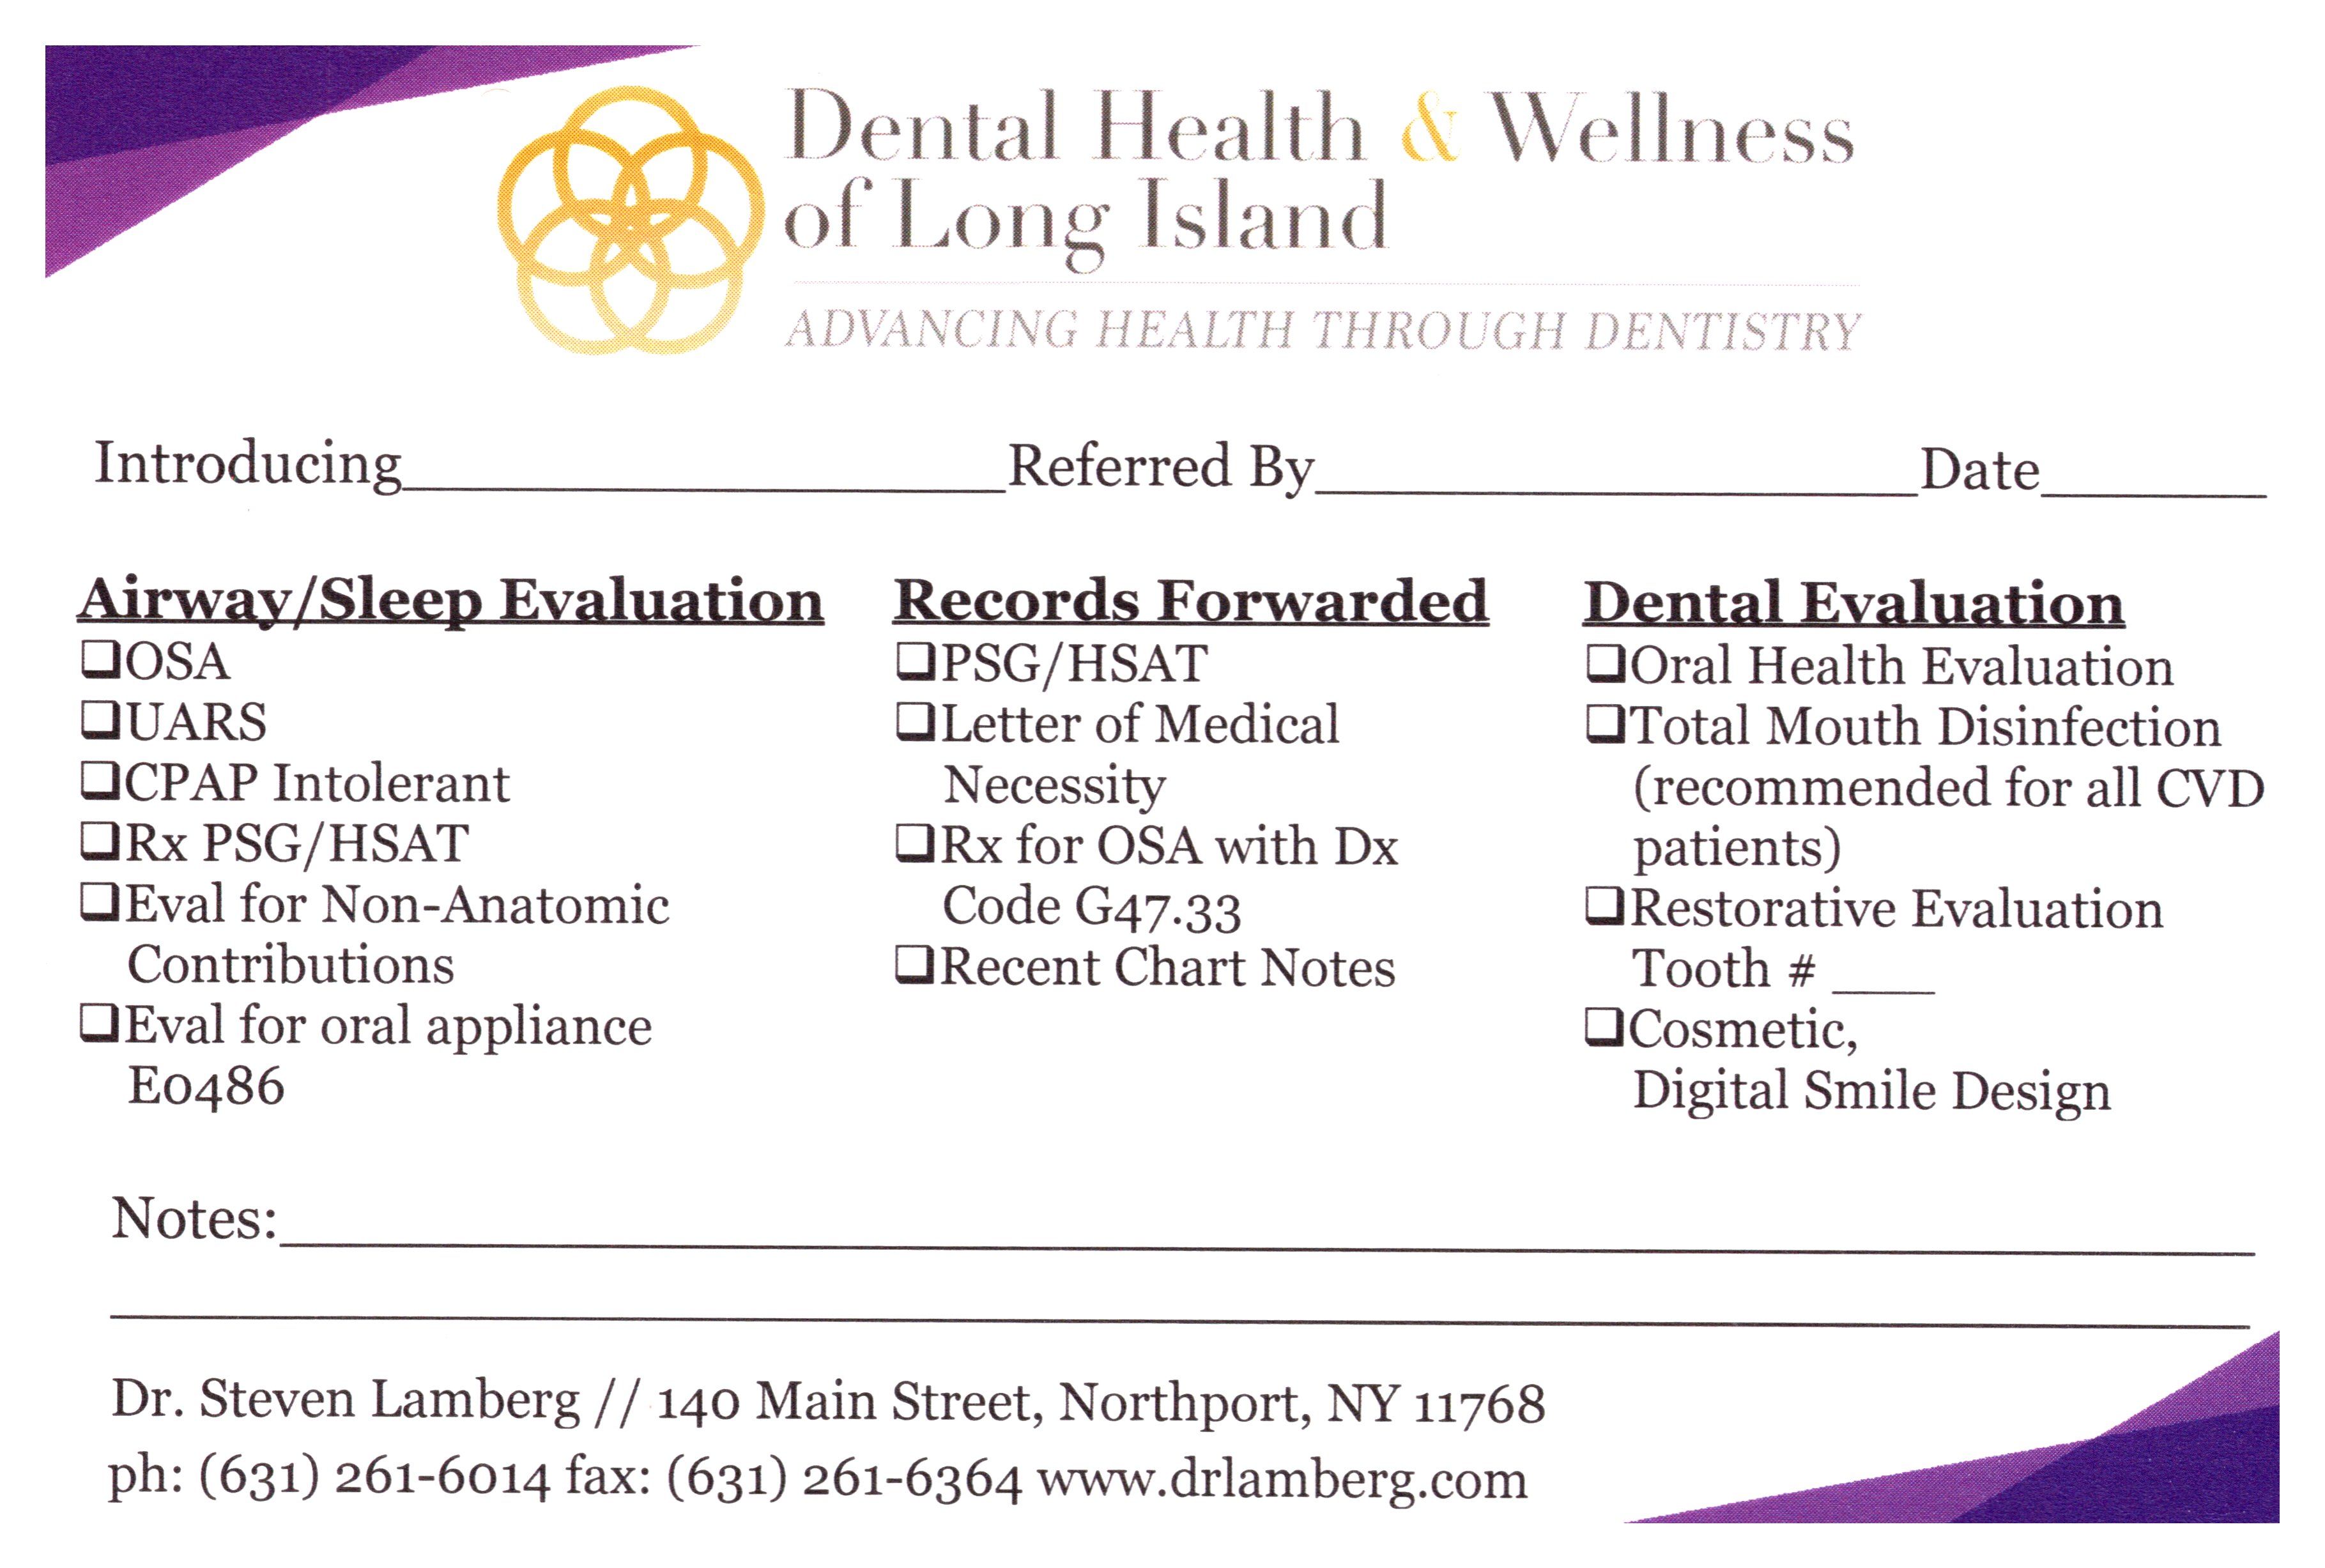 REFER A PATIENT TO DENTAL HEALTH